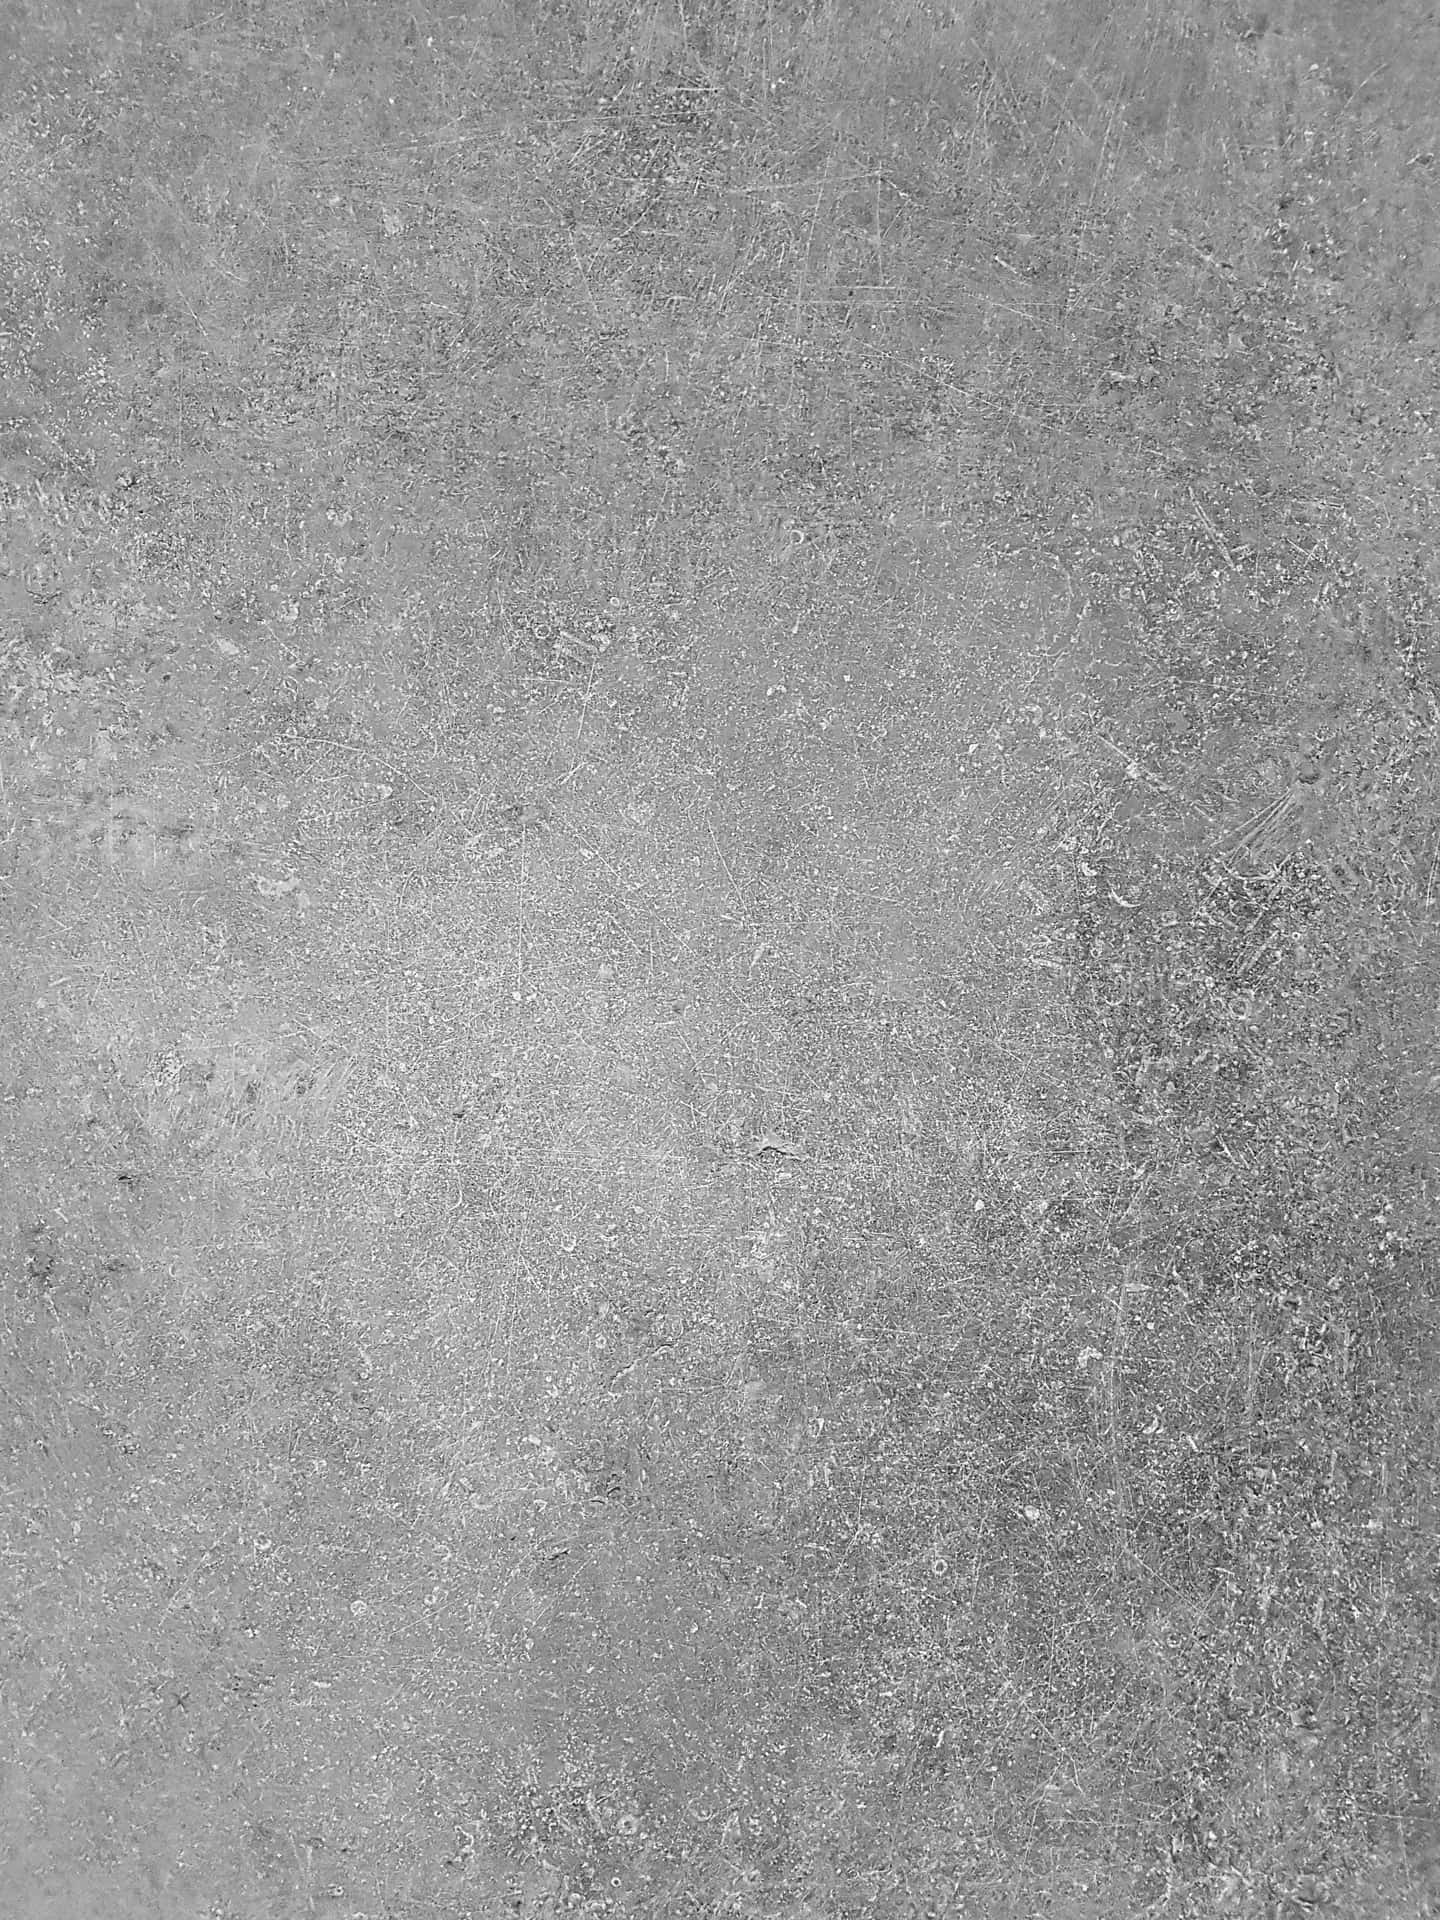 Abstract Gray Textured Background